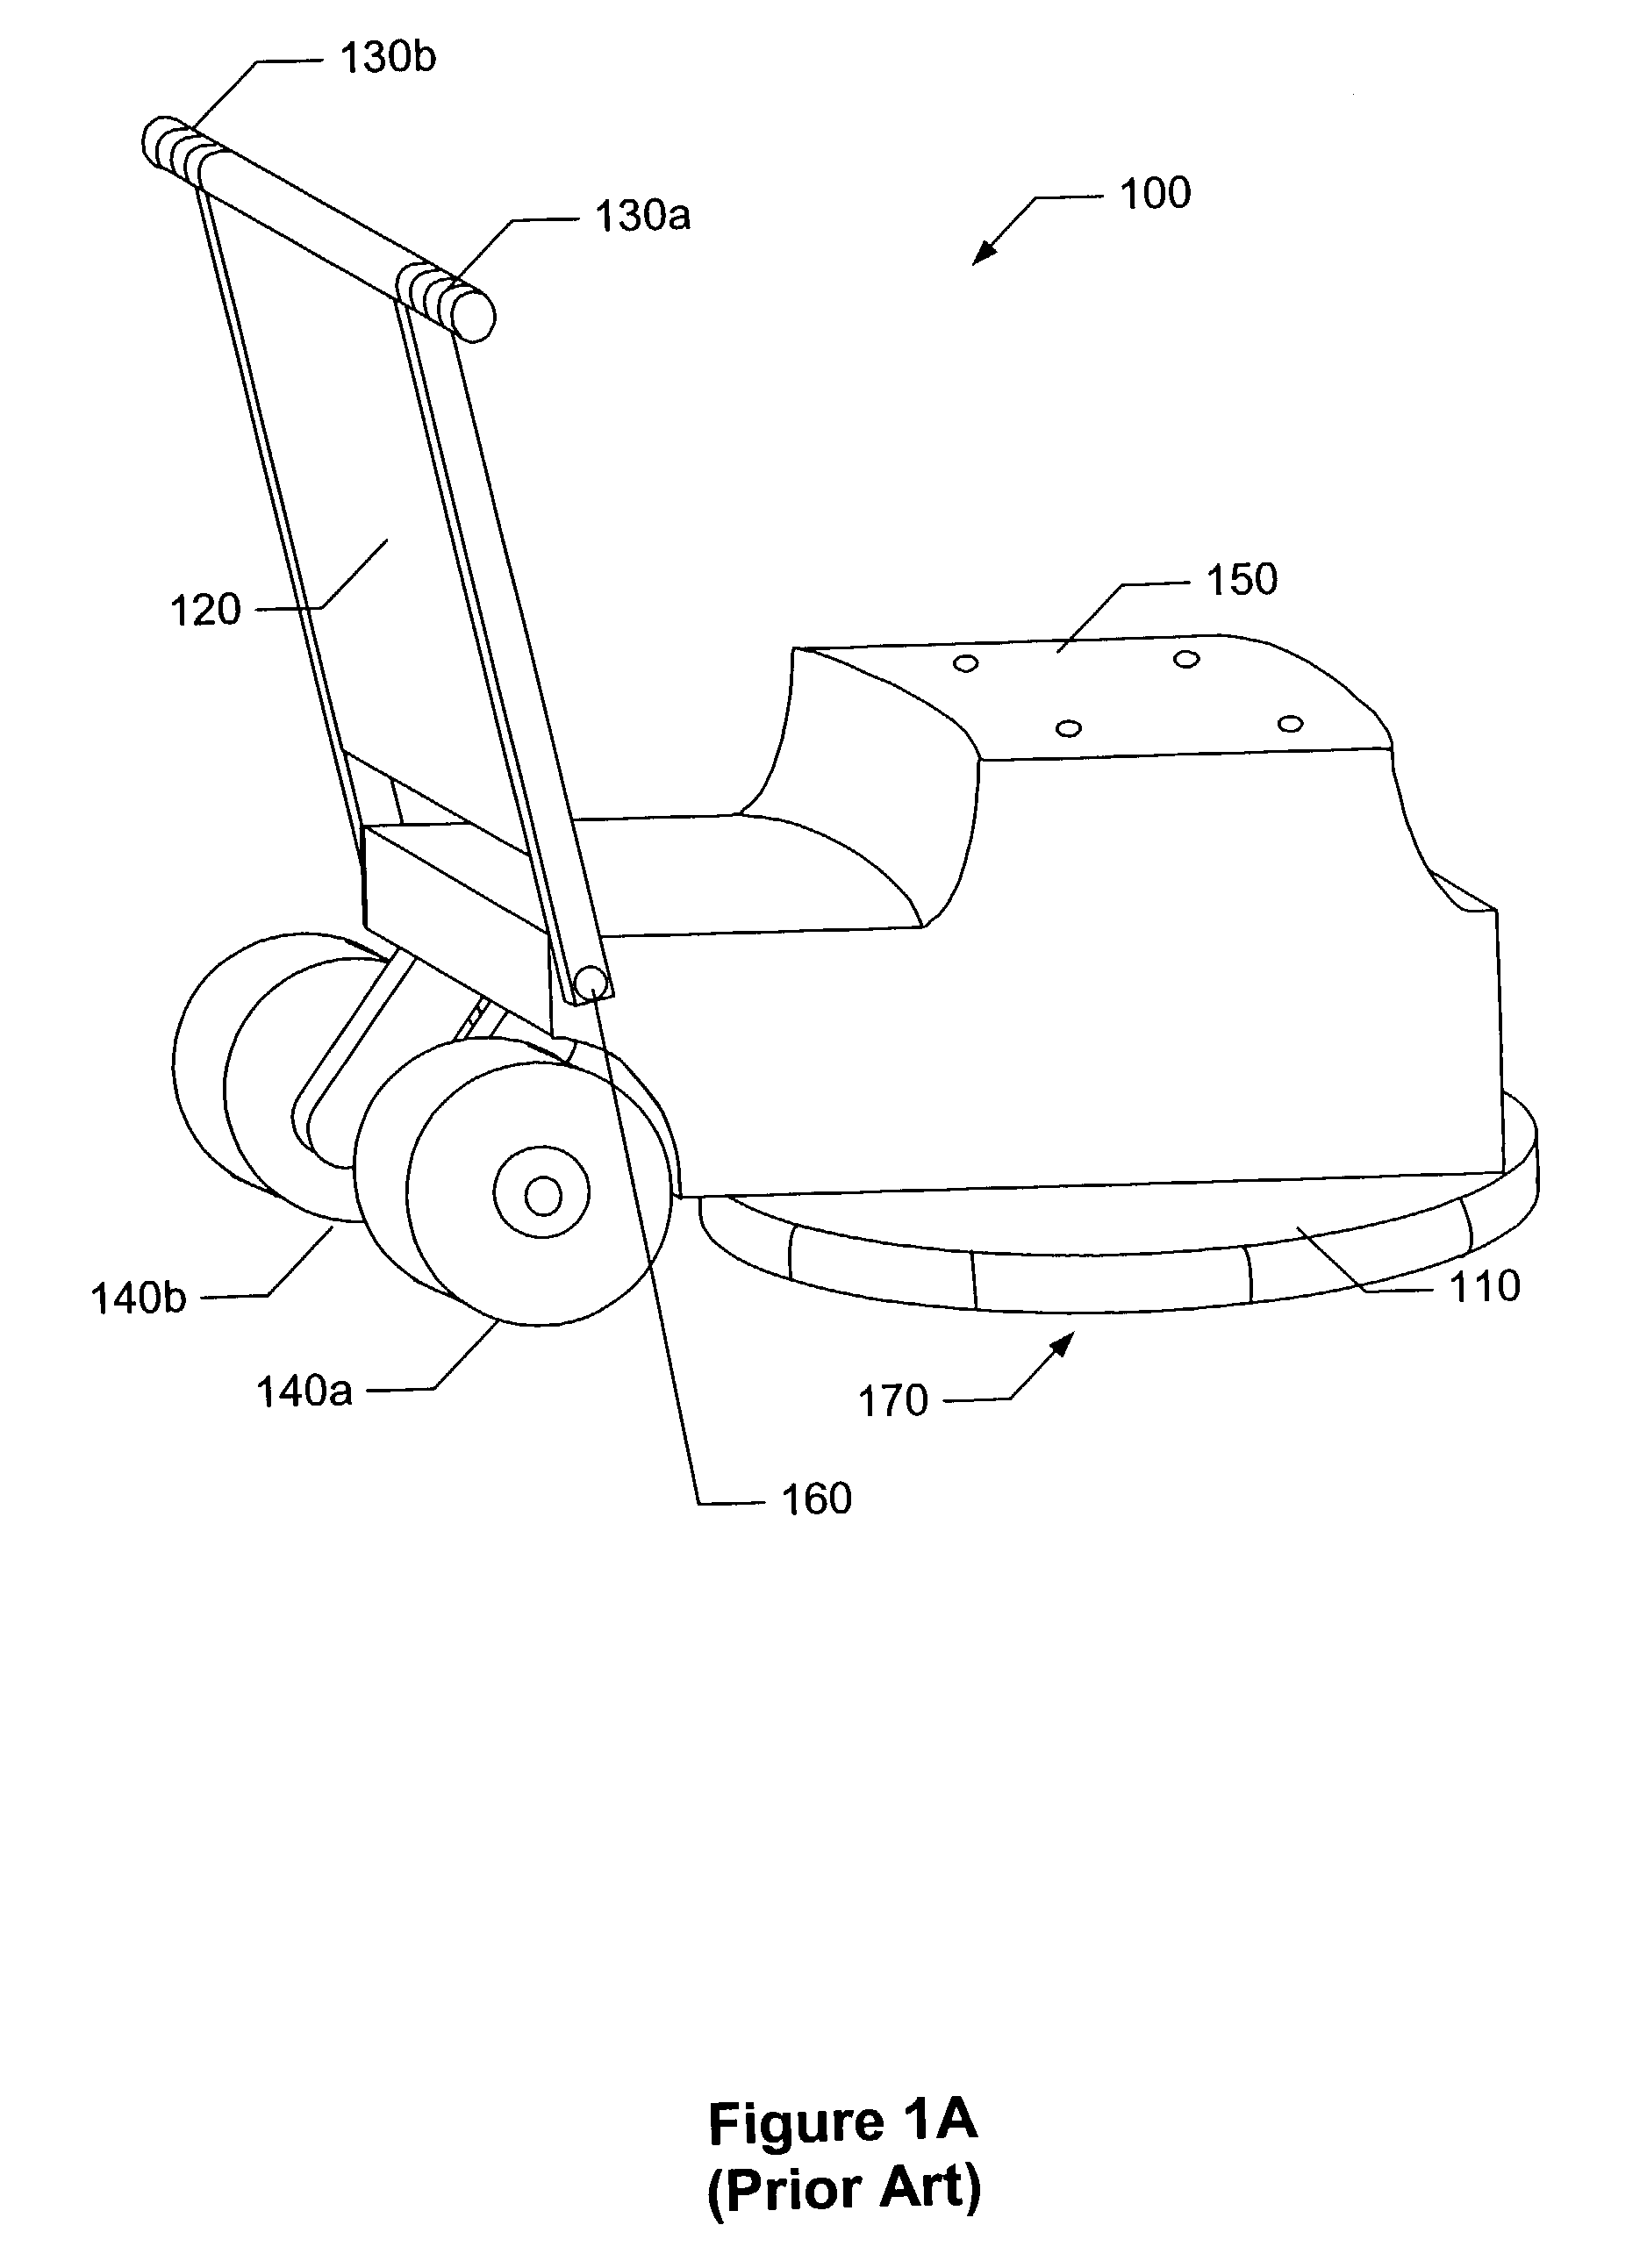 System and methods for reducing dust emissions